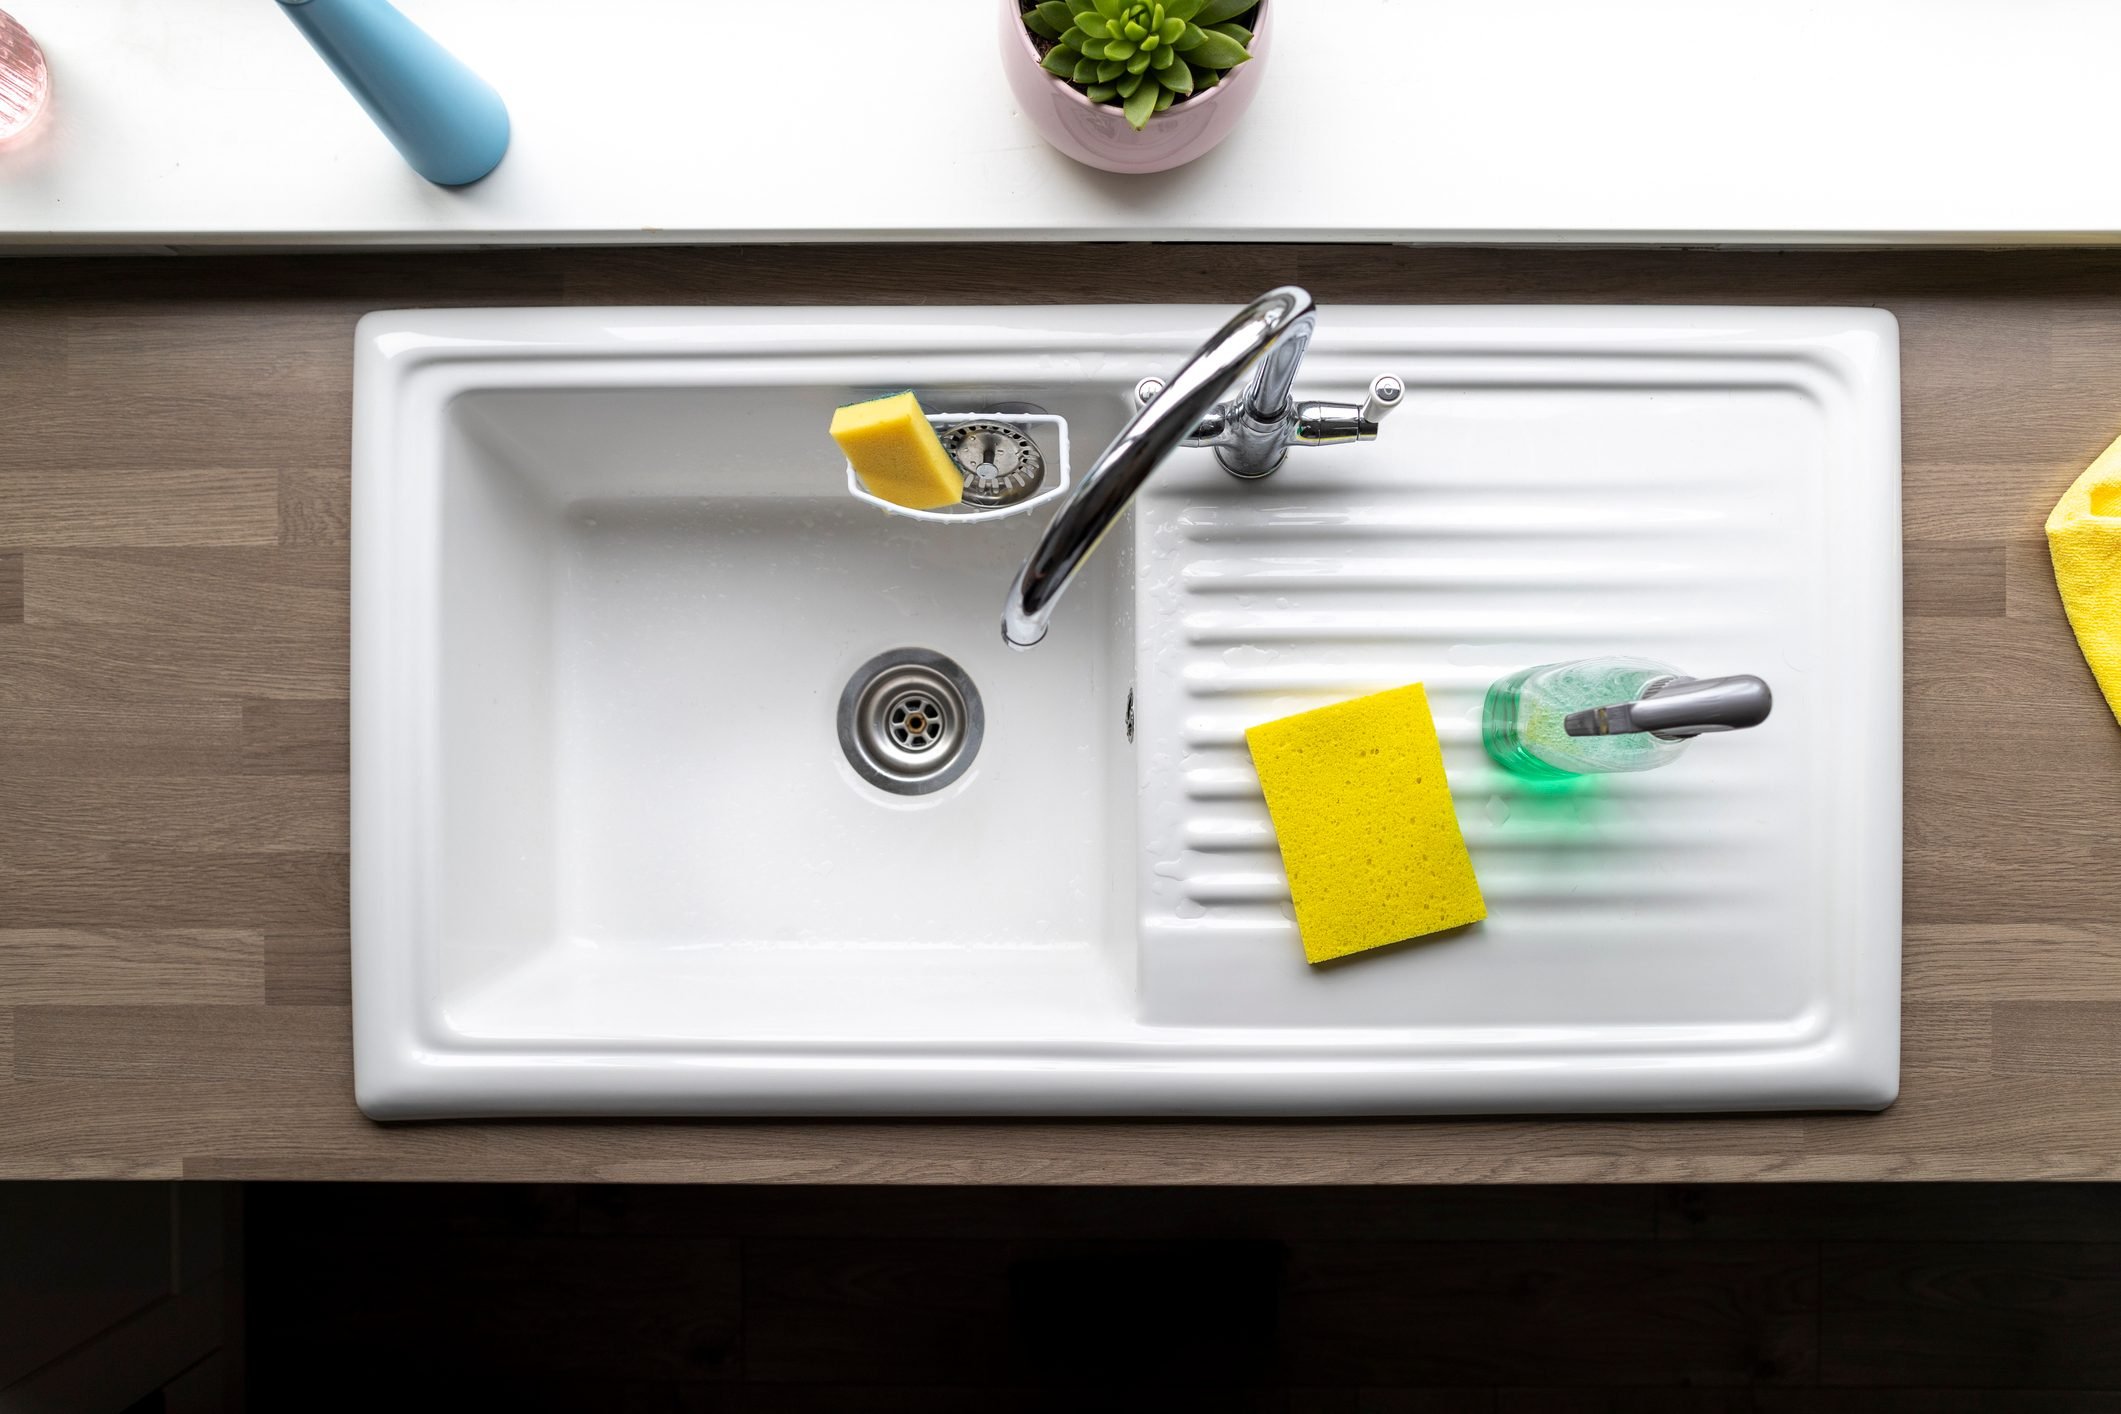 How to Clean a Kitchen Sponge